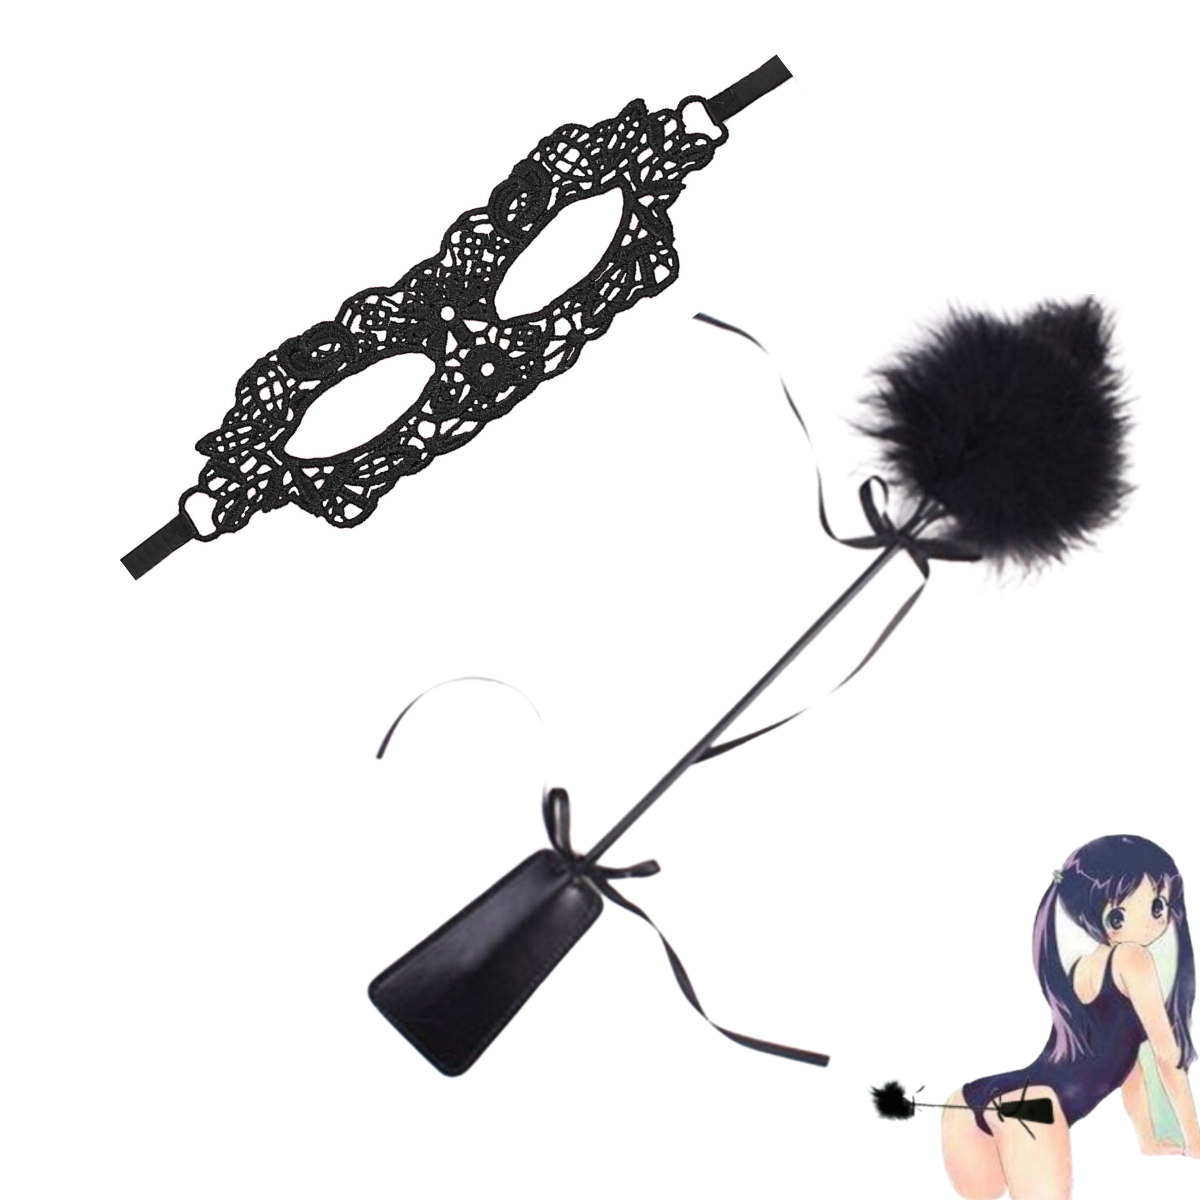 10pcs - 2-in-1 Spanking Paddle and Tickler and Sexy Embroidered Masquerade Mask|GCSM014GCL035-Black |UK seller